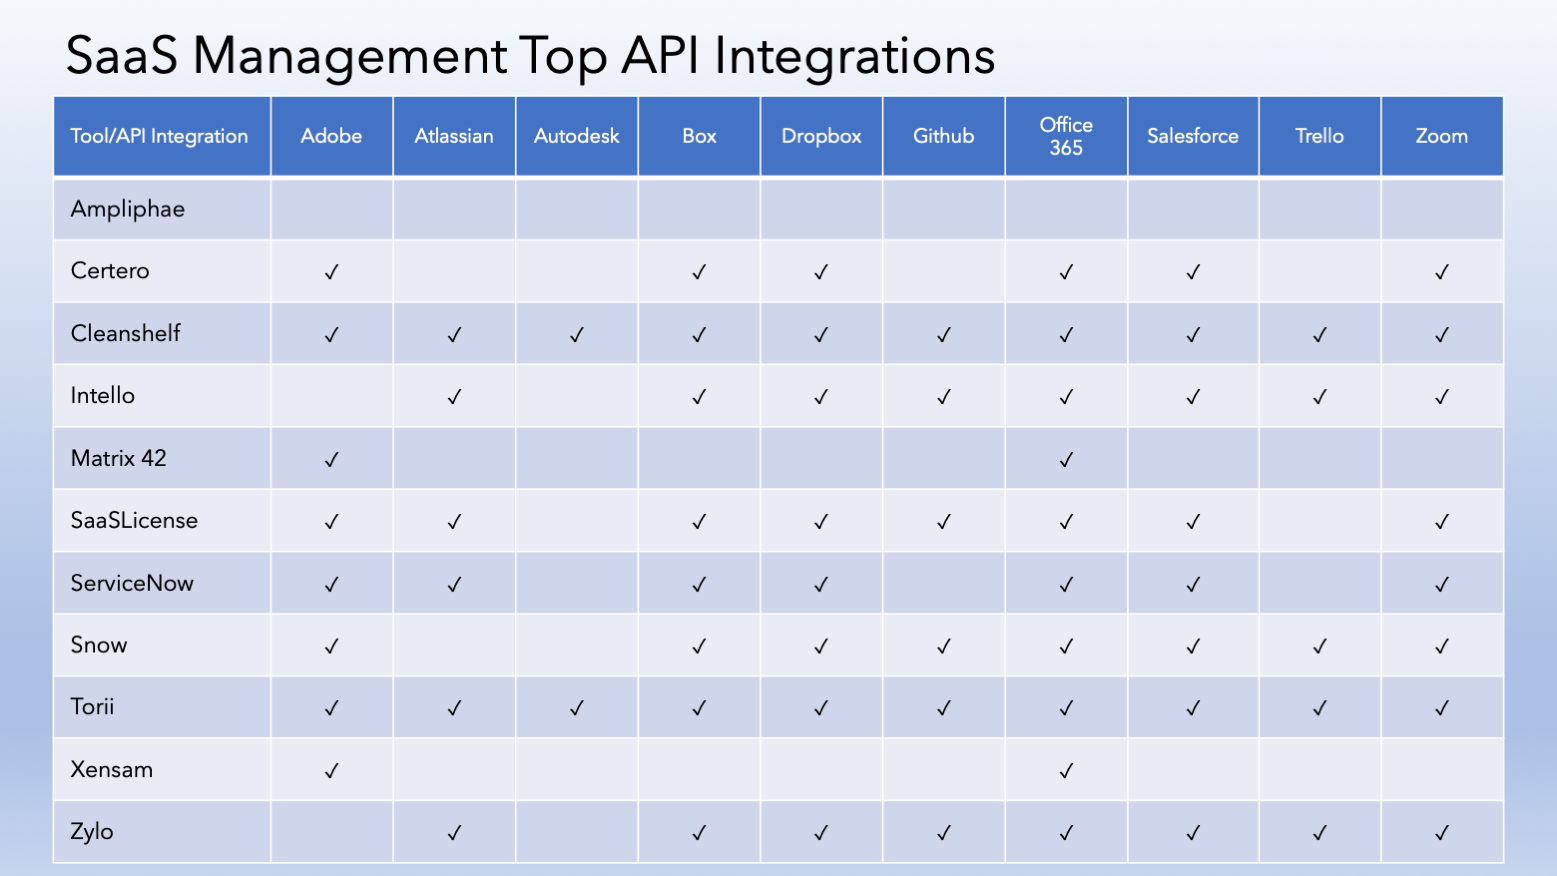 SaaS Management available API connections by vendor